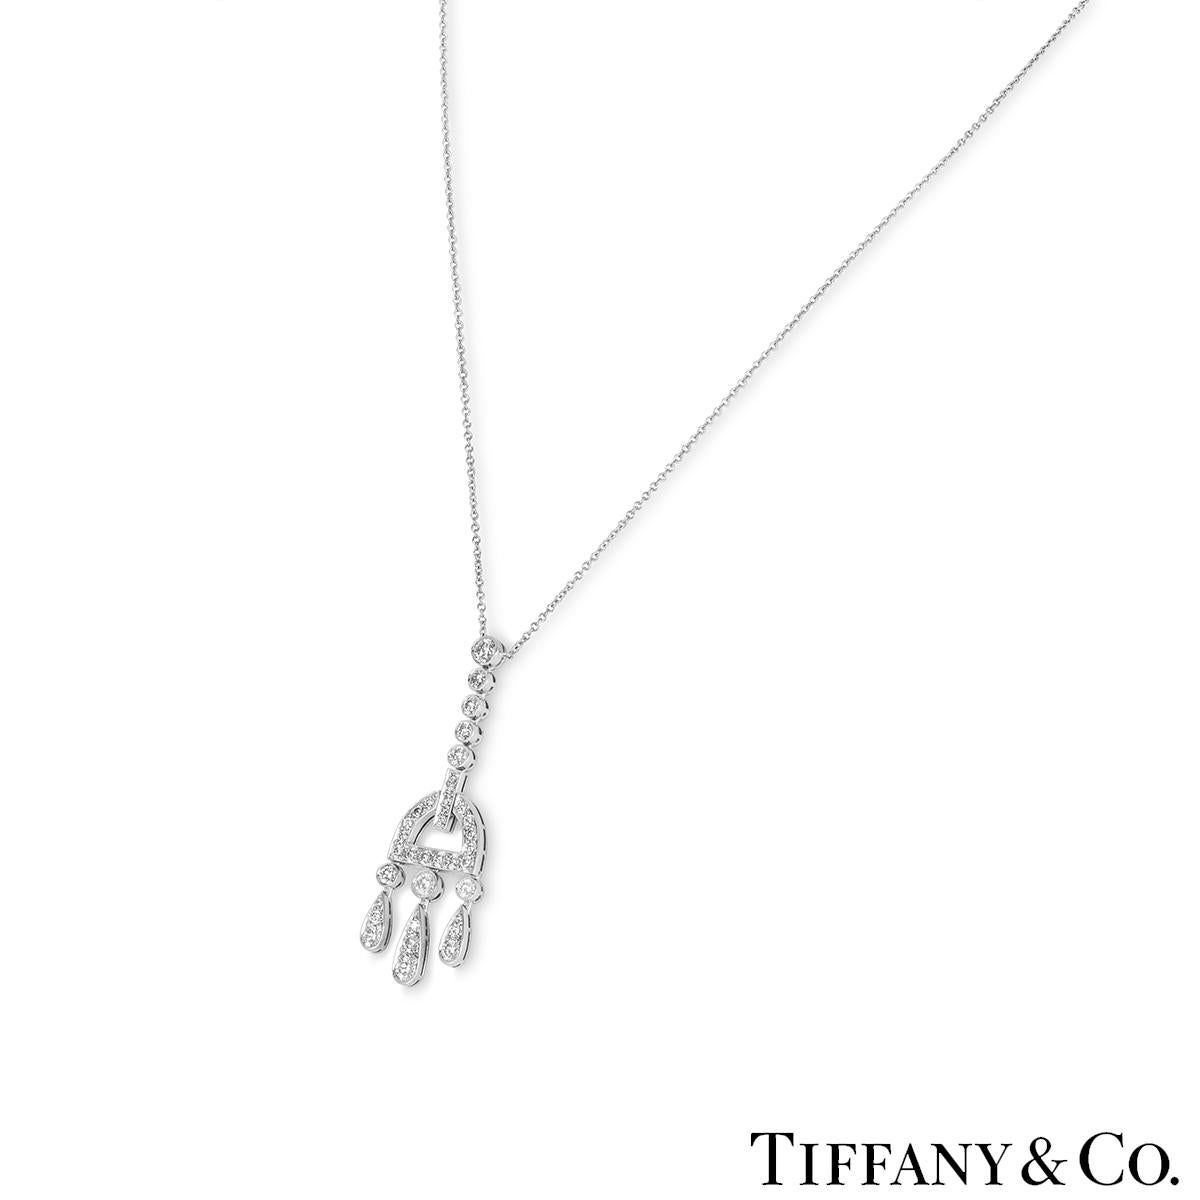 A stunning platinum diamond drop pendant from the Jazz collection by Tiffany & Co. The pendant has a row of five diamonds connecting to a semi circle with a further three diamonds suspending articulated droplets. The pendant has a total of 36 round